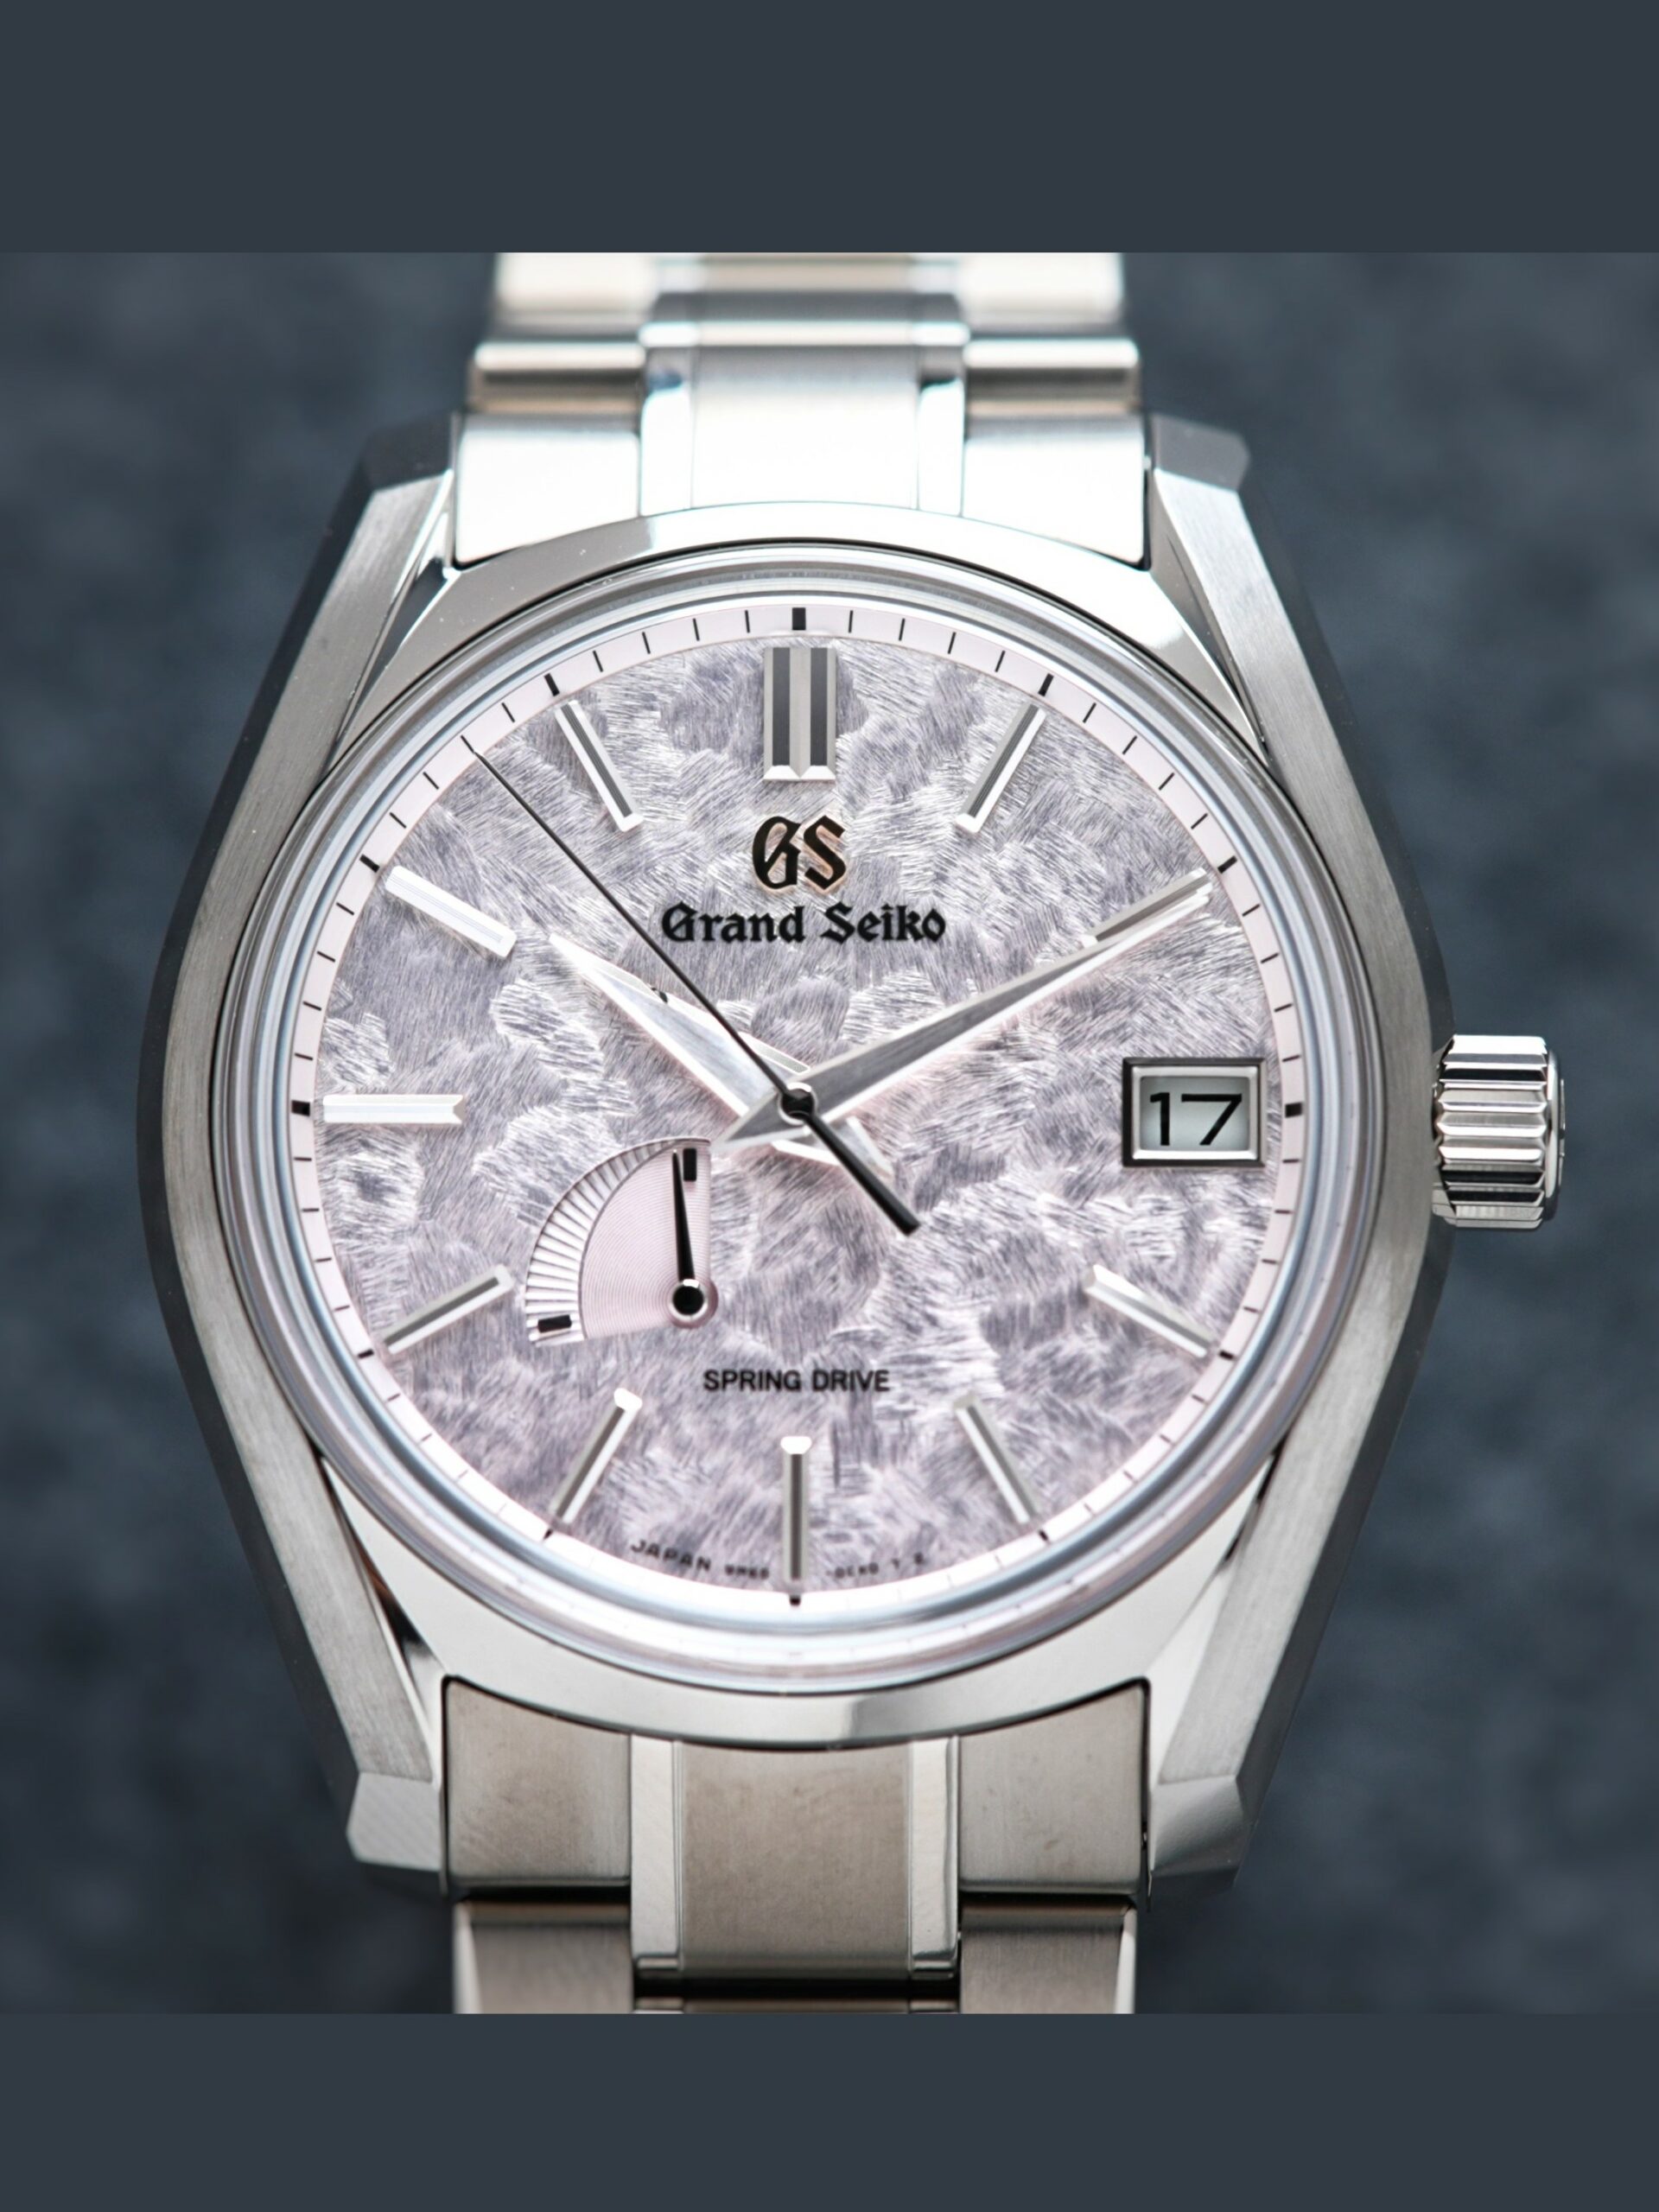 Grand Seiko Heritage Collection Seasons 'Spring' SBGA413 watch featured under white lighting.